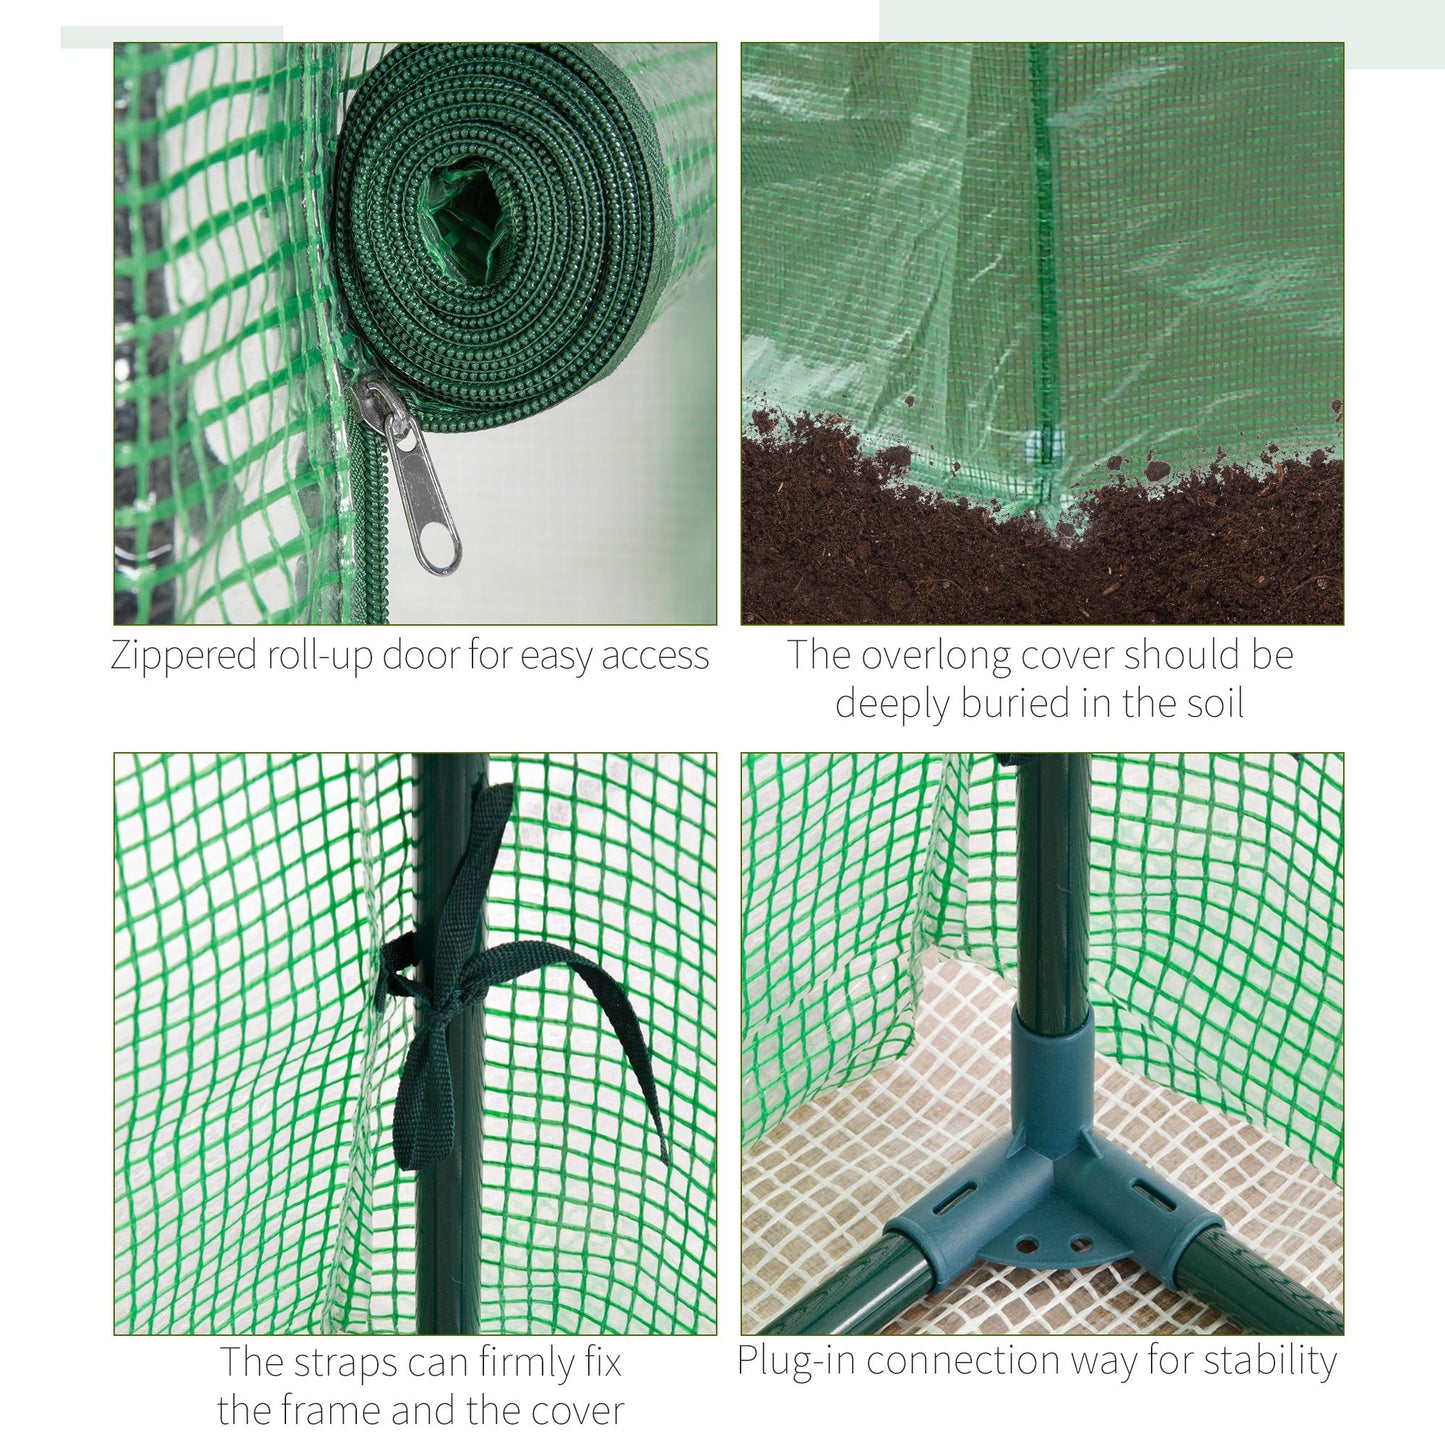 Outsunny 100 x 50 x 150cm Greenhouse Steel Frame PE Cover w-Roll-up Door Outdoor for Backyard, Balcony, Garden, Green